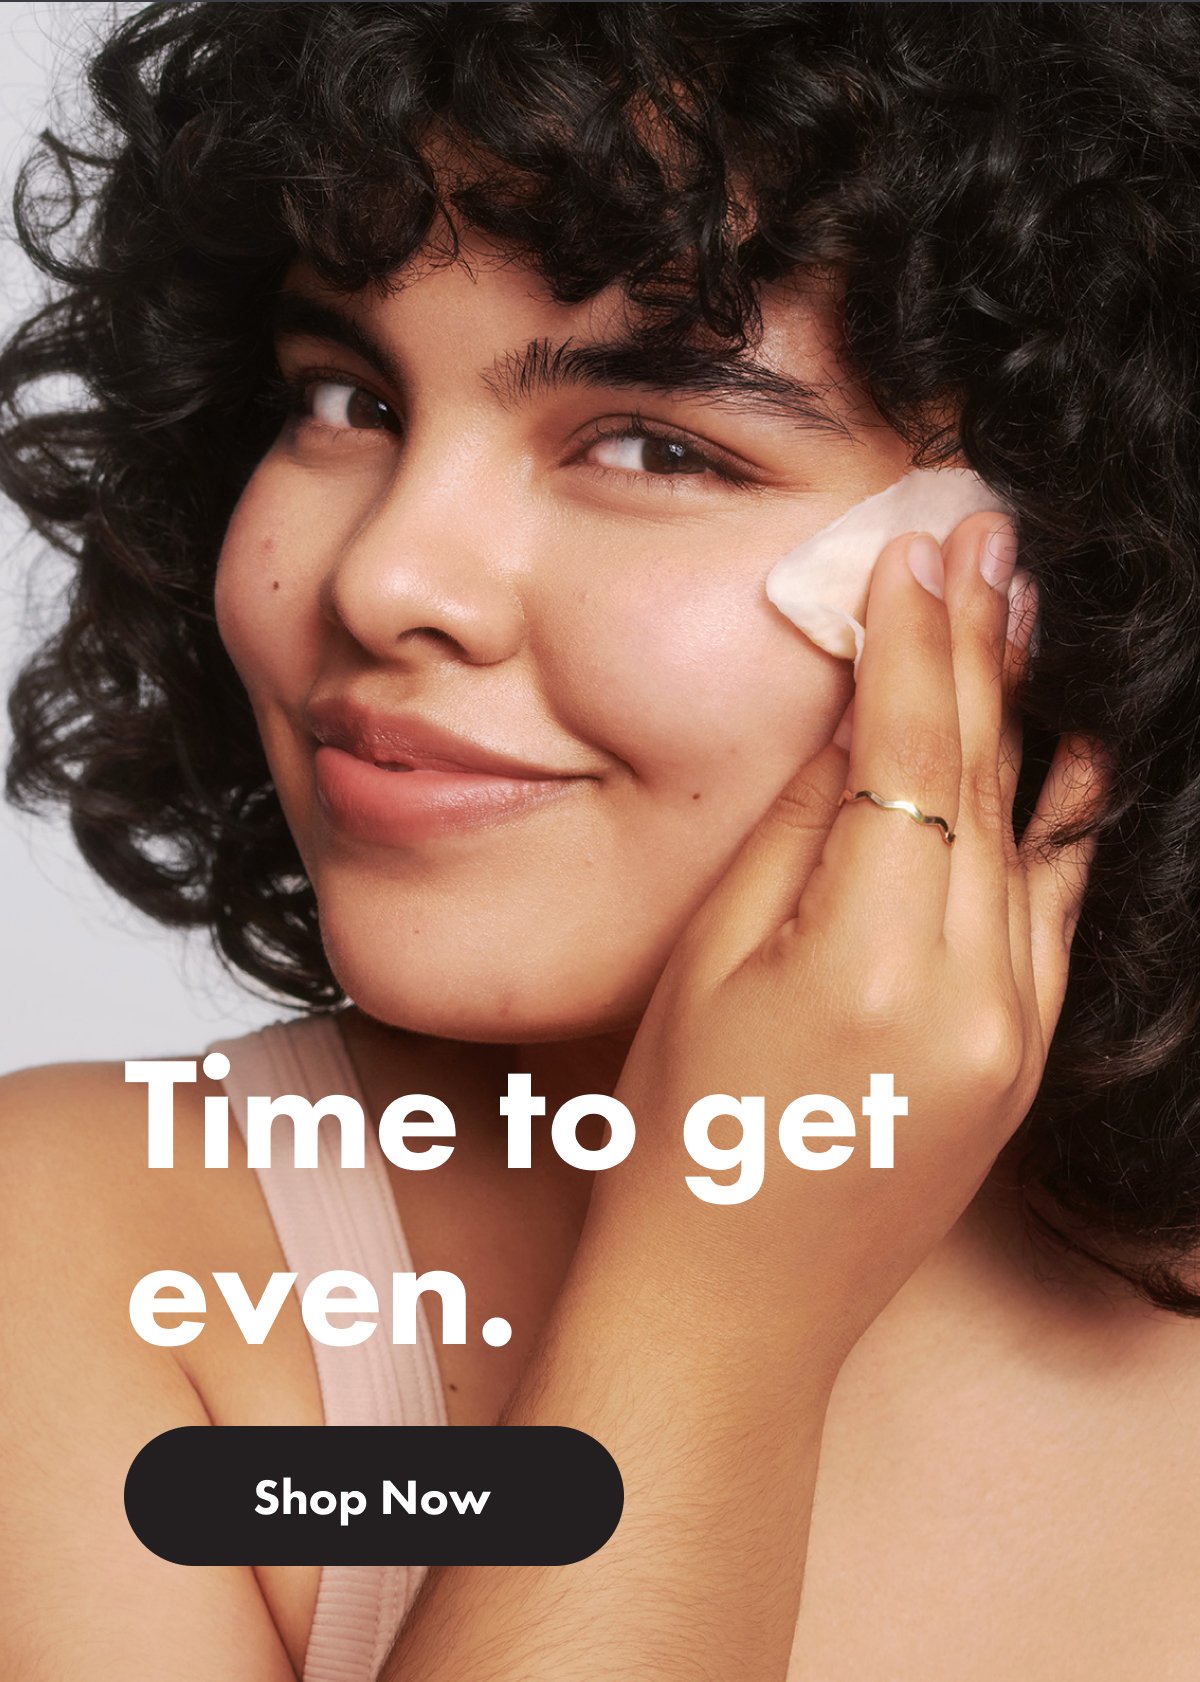 Girl swiping Lightning Swipe across her face. Time to get even. Shop now